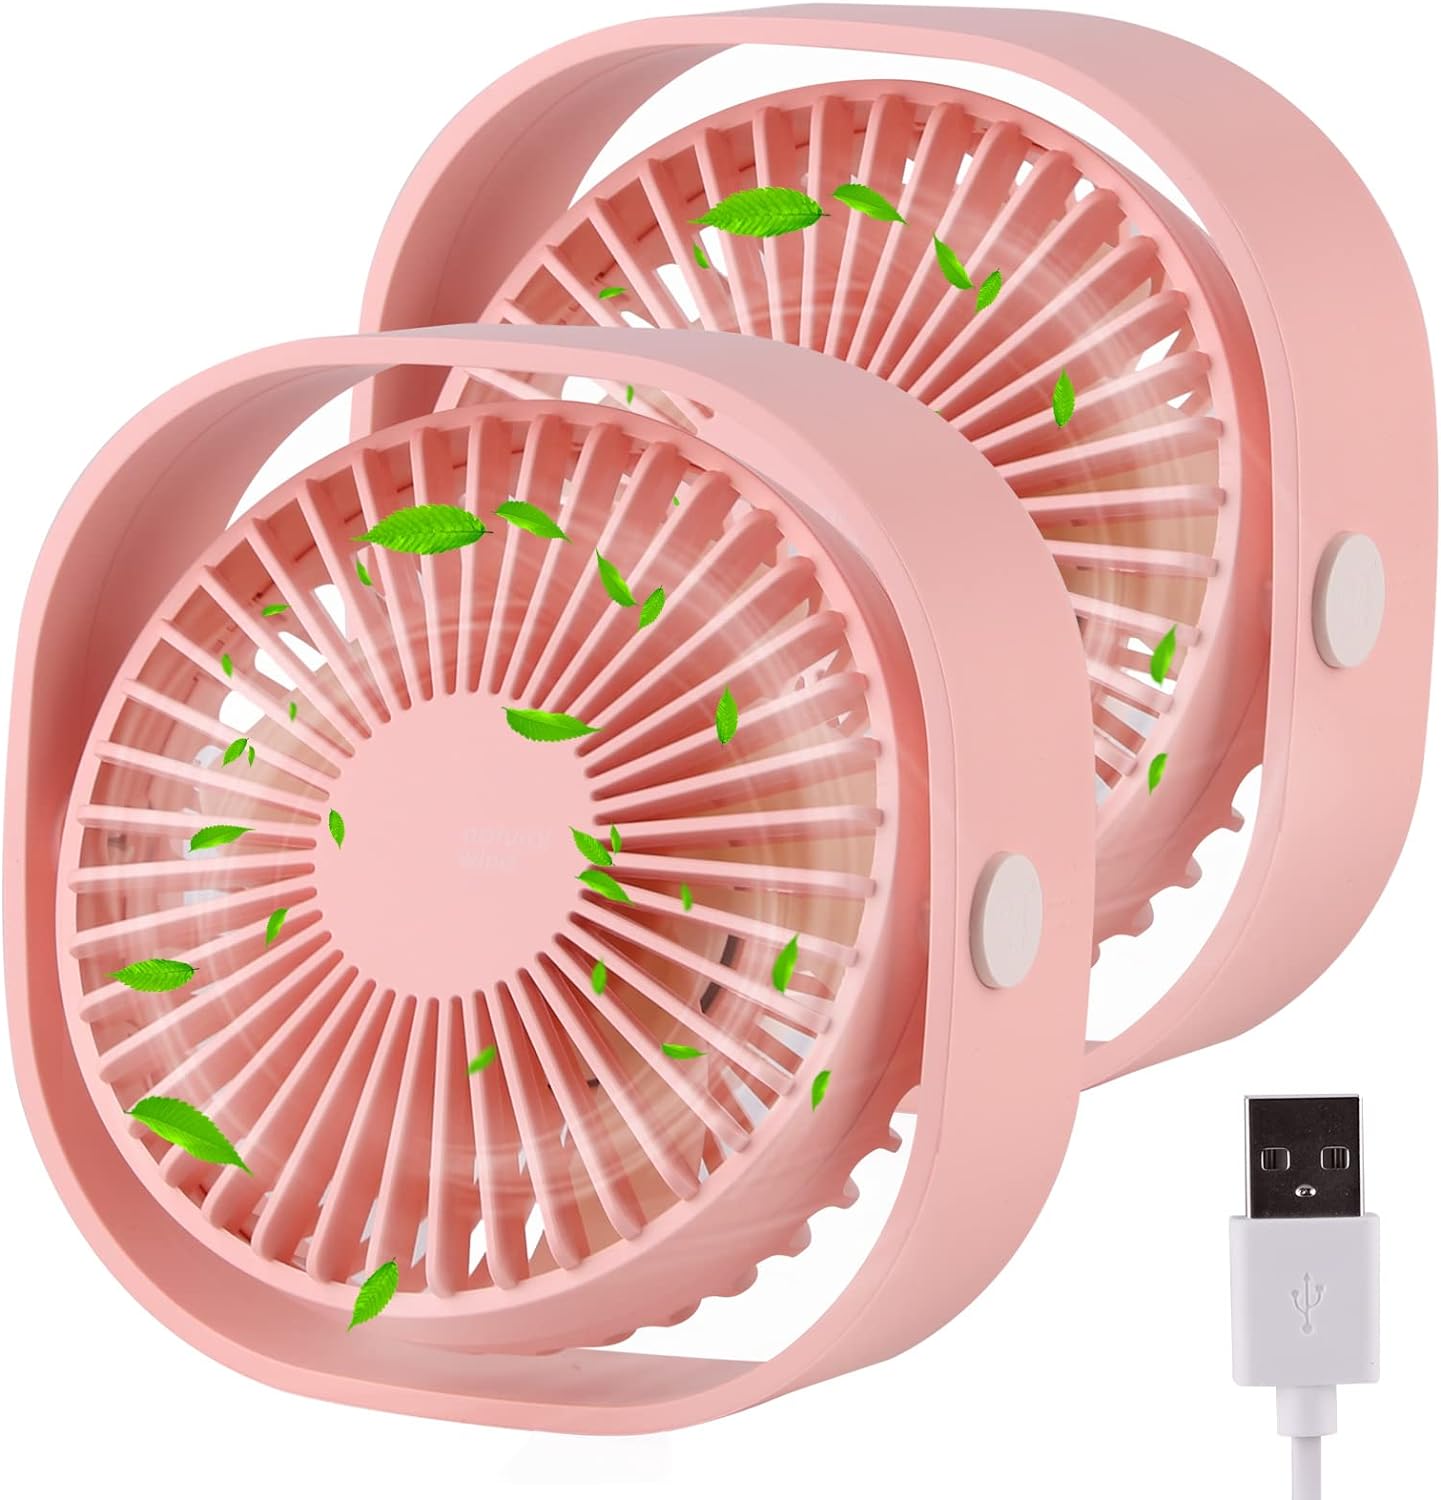 2 Pieces USB Desk Fans Small Quiet, 3 Speeds Portable Table Fan, 360Rotatable Mini Desk Fan, Five-bladed Turbo Blade, 3.9 Feet Powered by USB with Anti-slip Pad - Pink